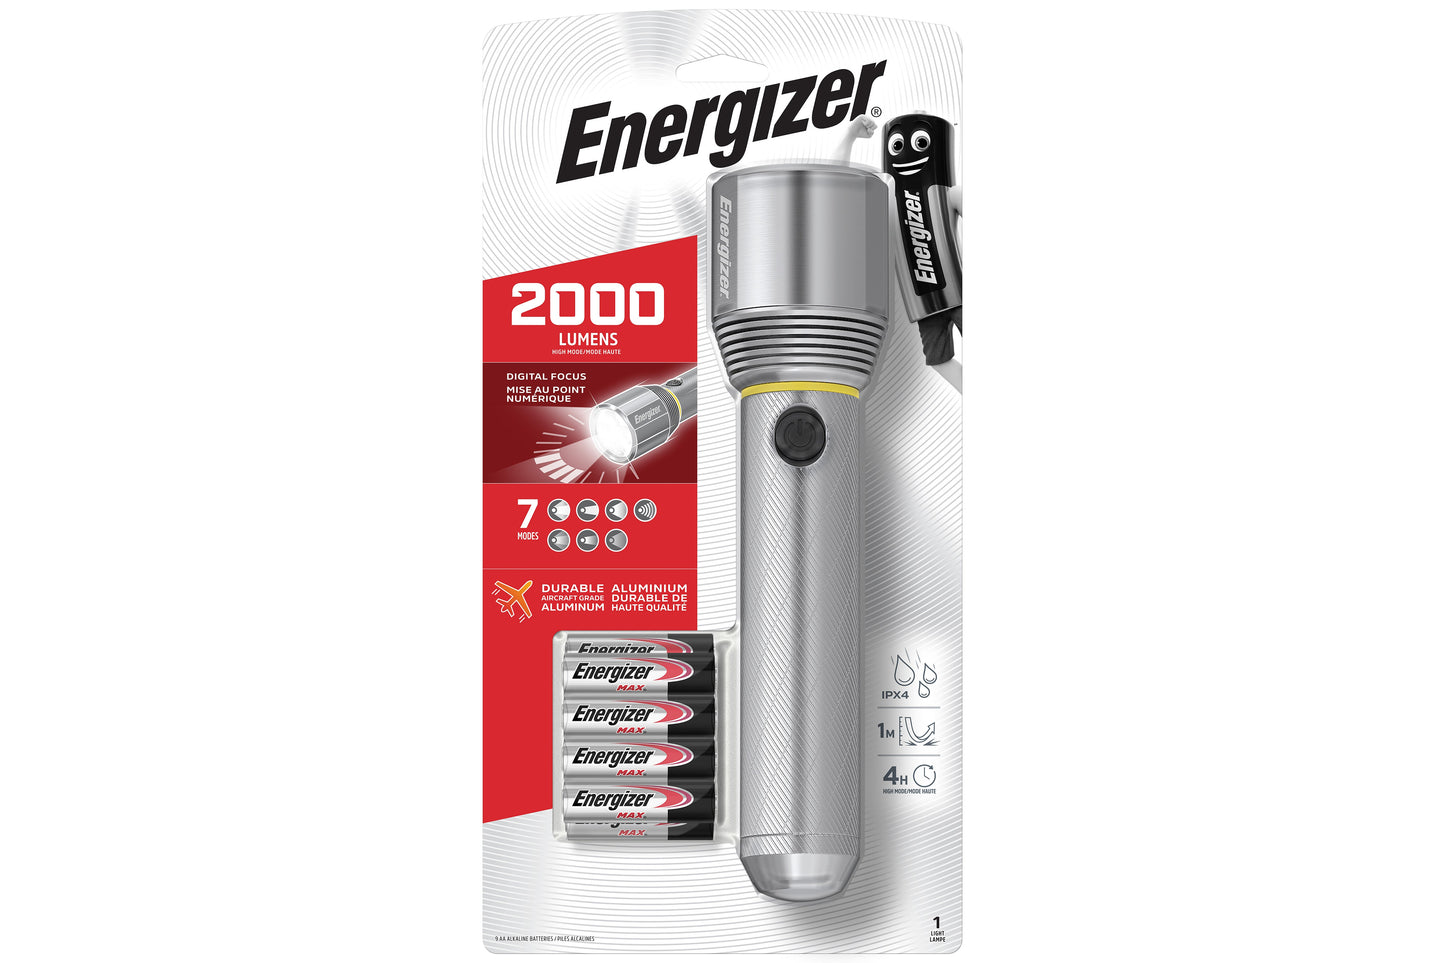 Energizer Metal Case 2000 Lumens LED Torch with 9x AA Batteries - maplin.co.uk